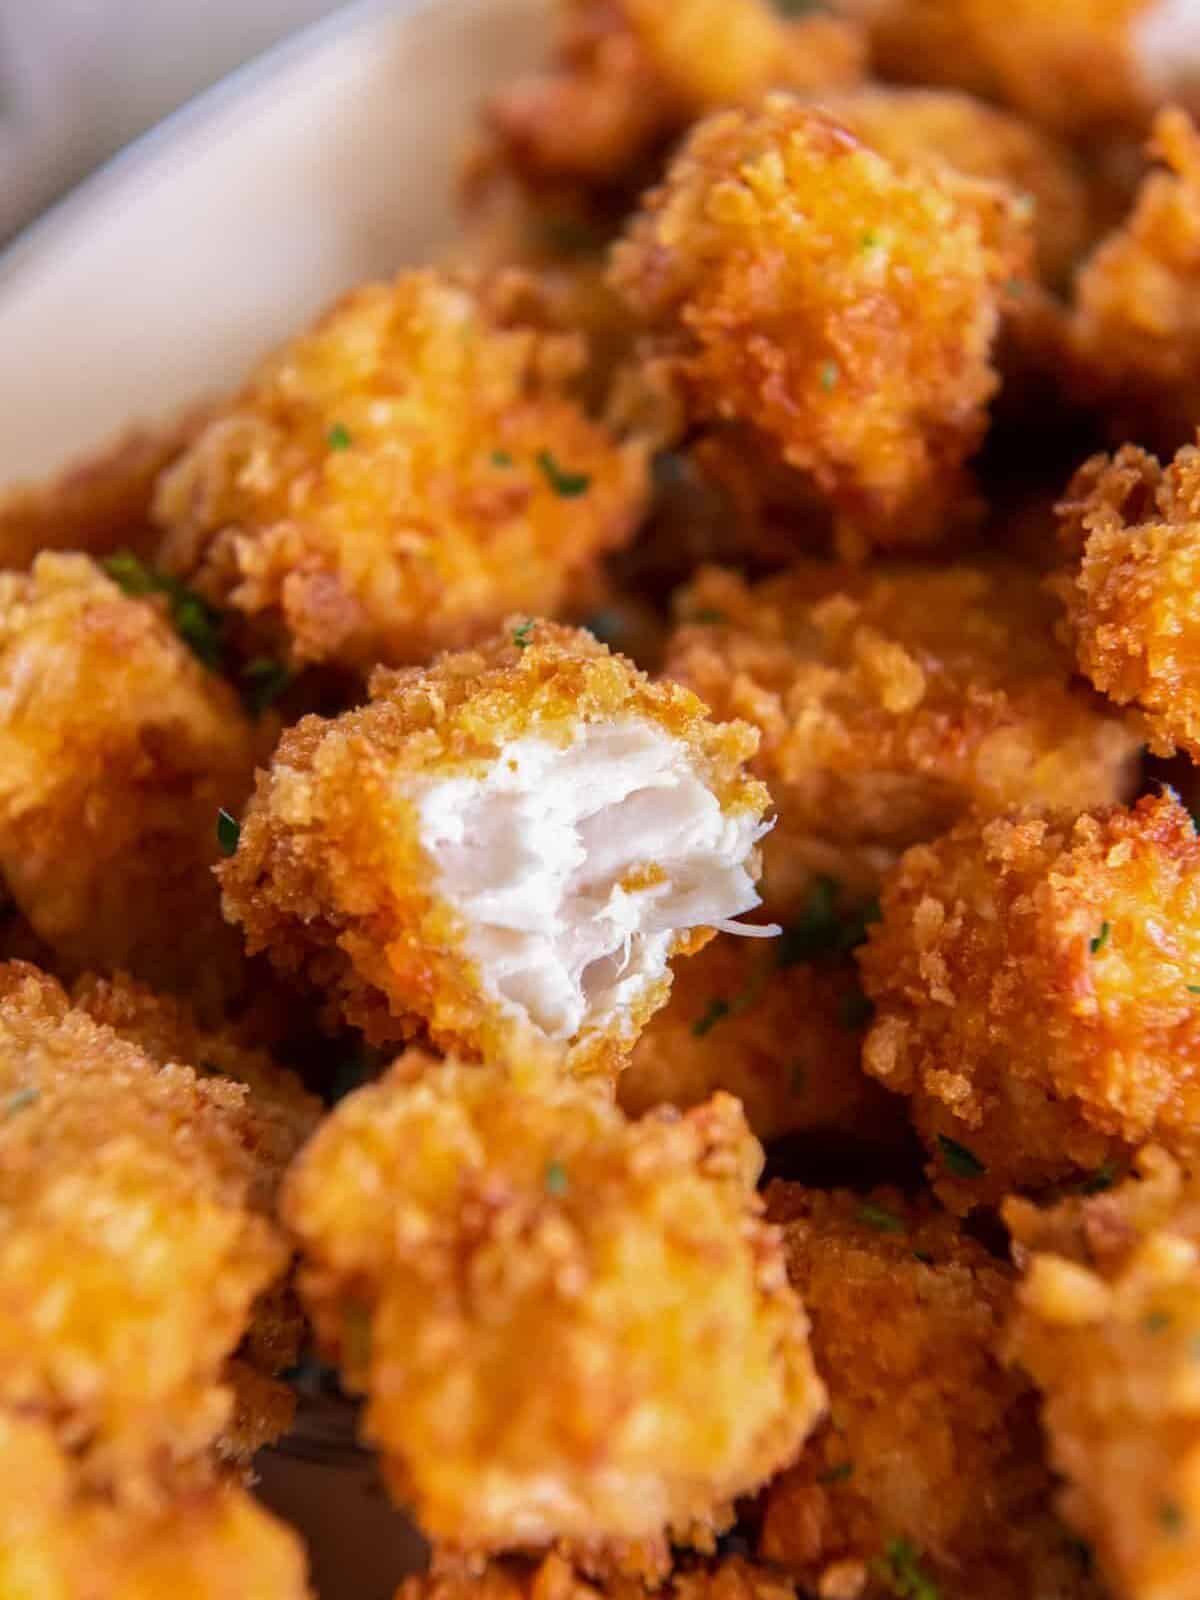 close up of a bitten piece of popcorn chicken on a pile of popcorn chicken.